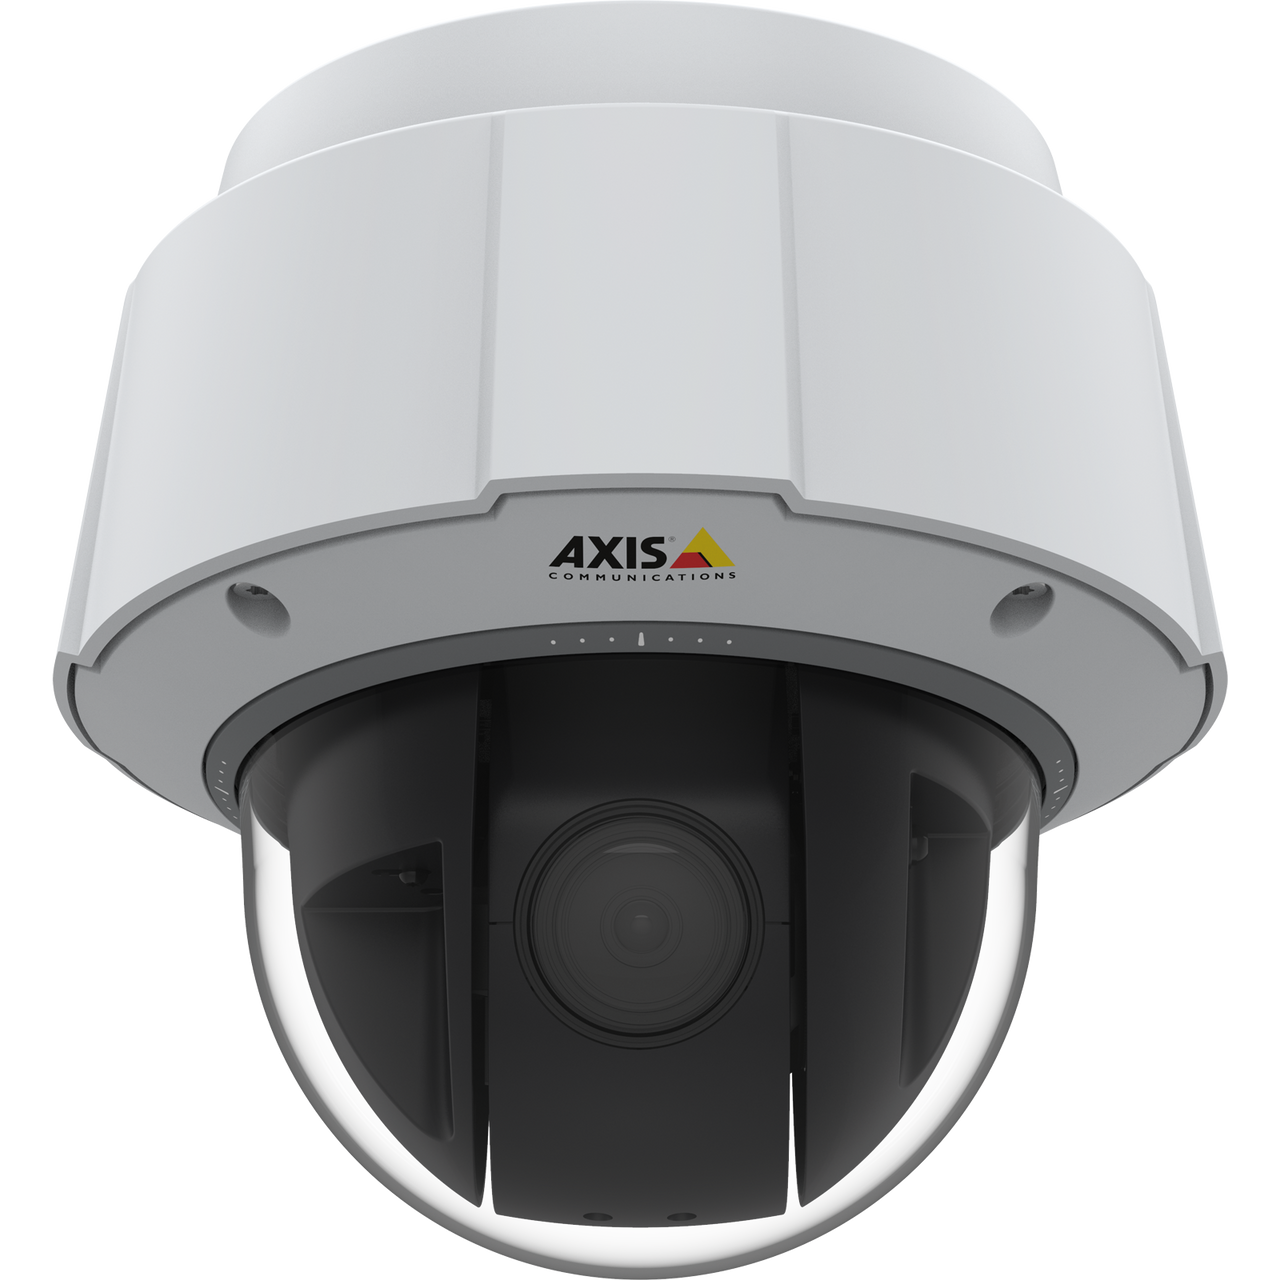 AXIS Q6075 60HZ Indoor PTZ with HDTV 1080p and 40x optical zoom